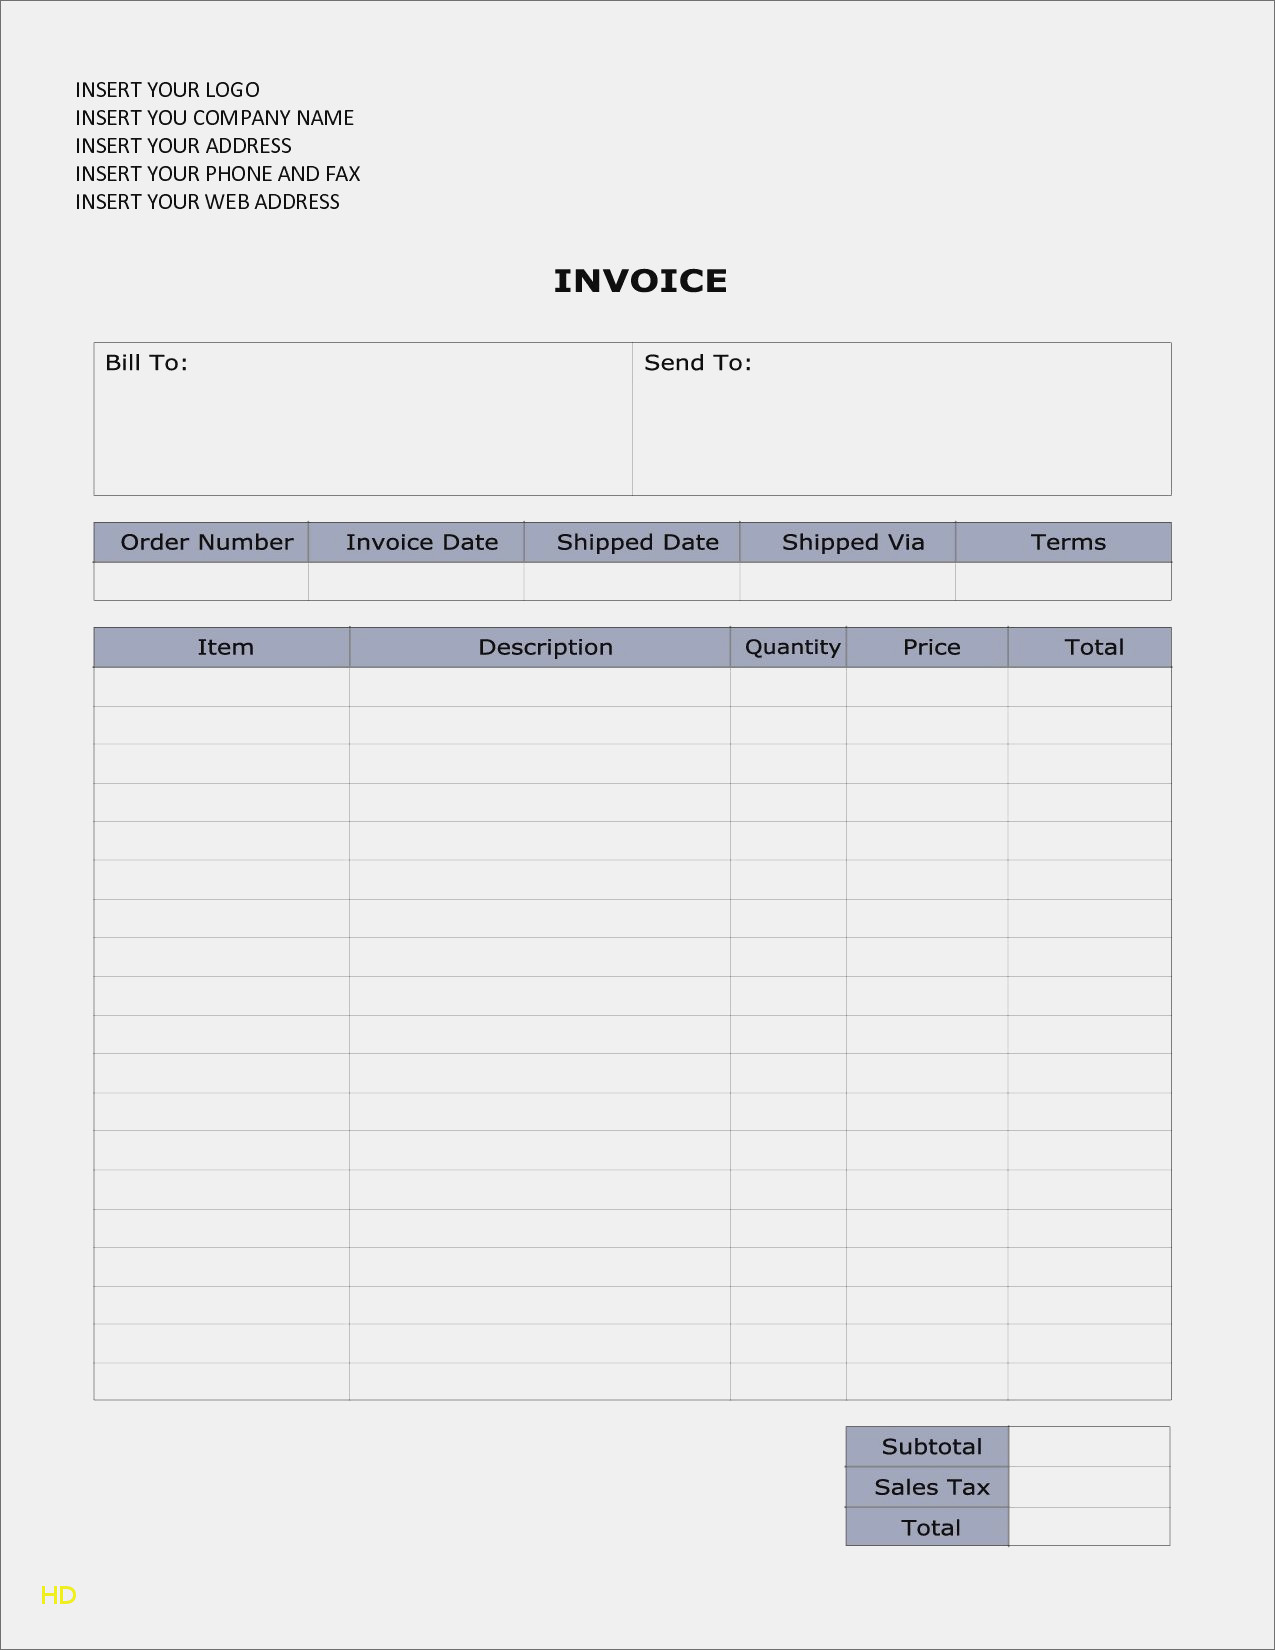 Spreadsheet Example Of Simple Payroll Inspiration Tax Invoice Format To Simple Payroll Spreadsheet